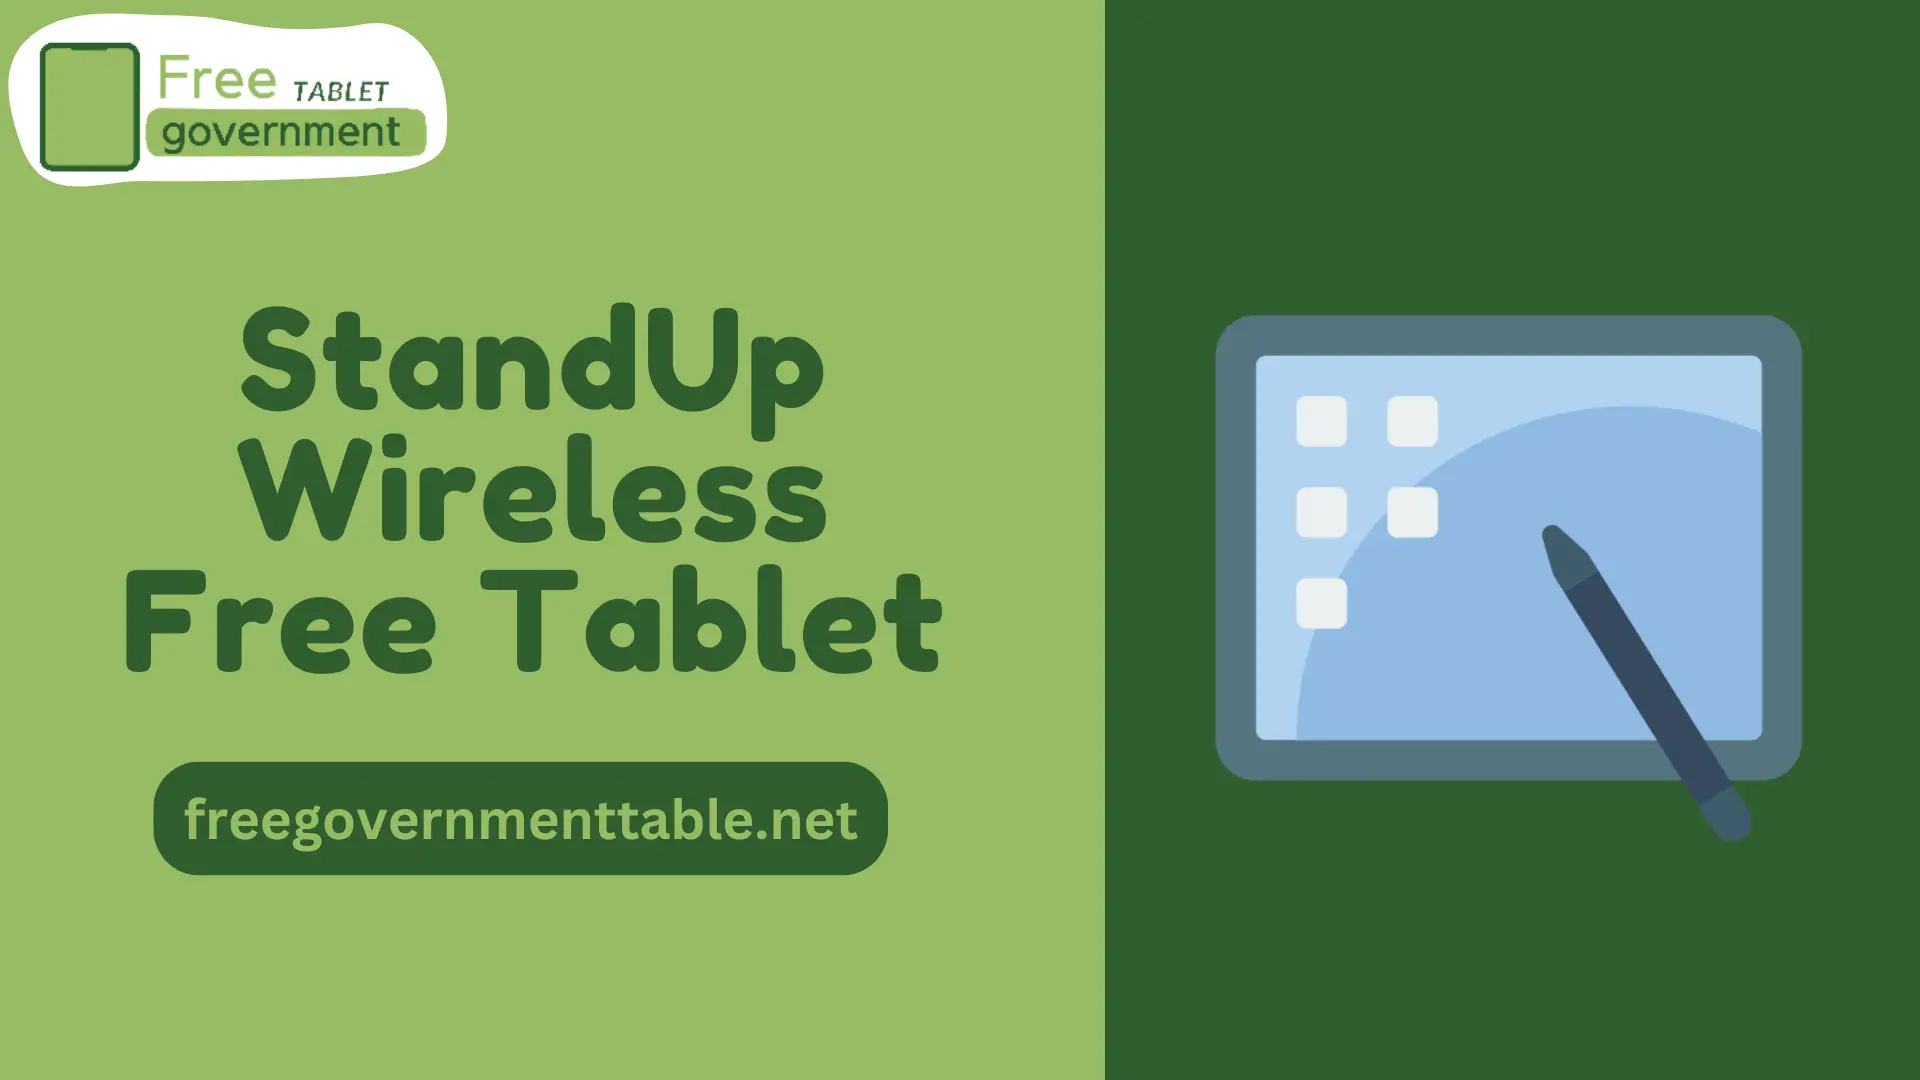 StandUp Wireless Free Tablet